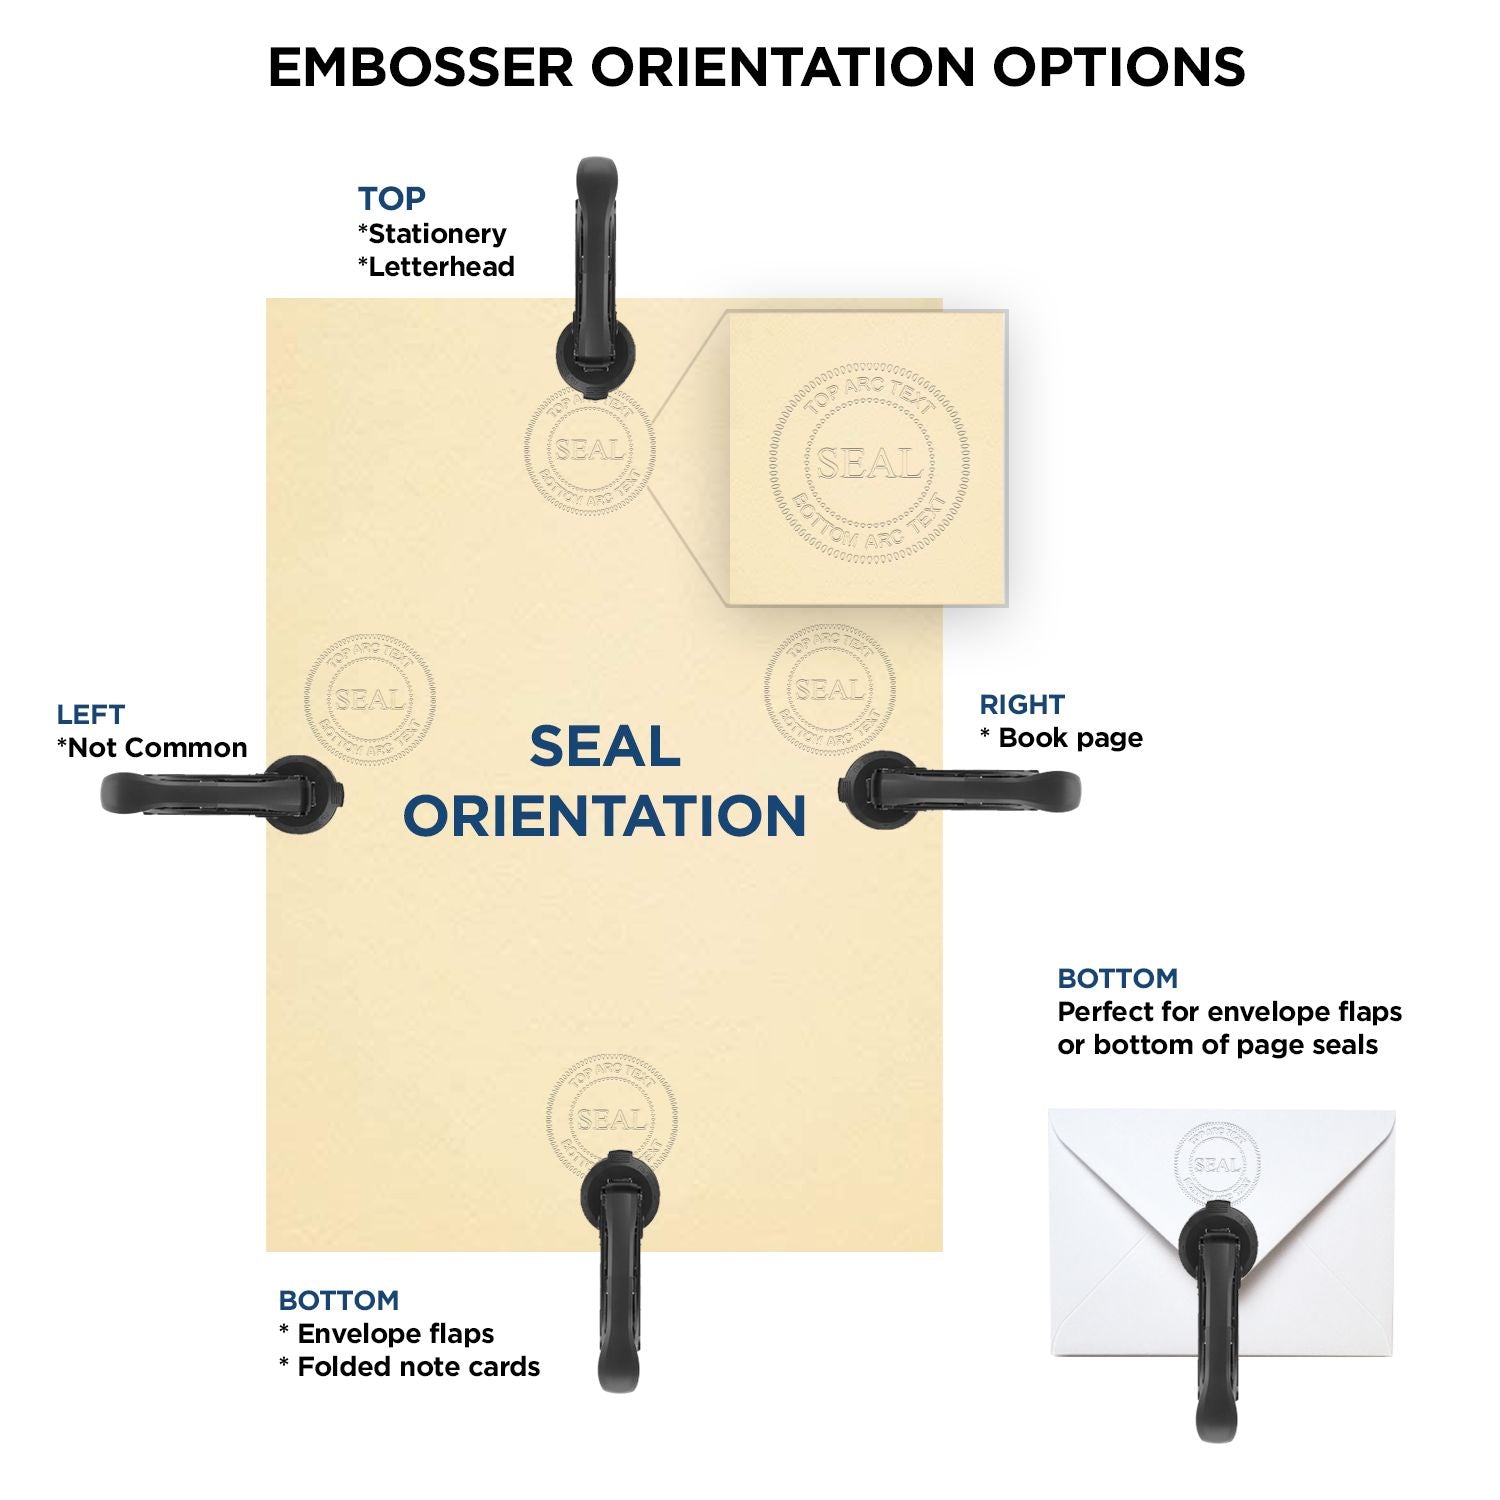 An infographic for the Handheld Arkansas Architect Seal Embosser showing embosser orientation, this is showing examples of a top, bottom, right and left insert.